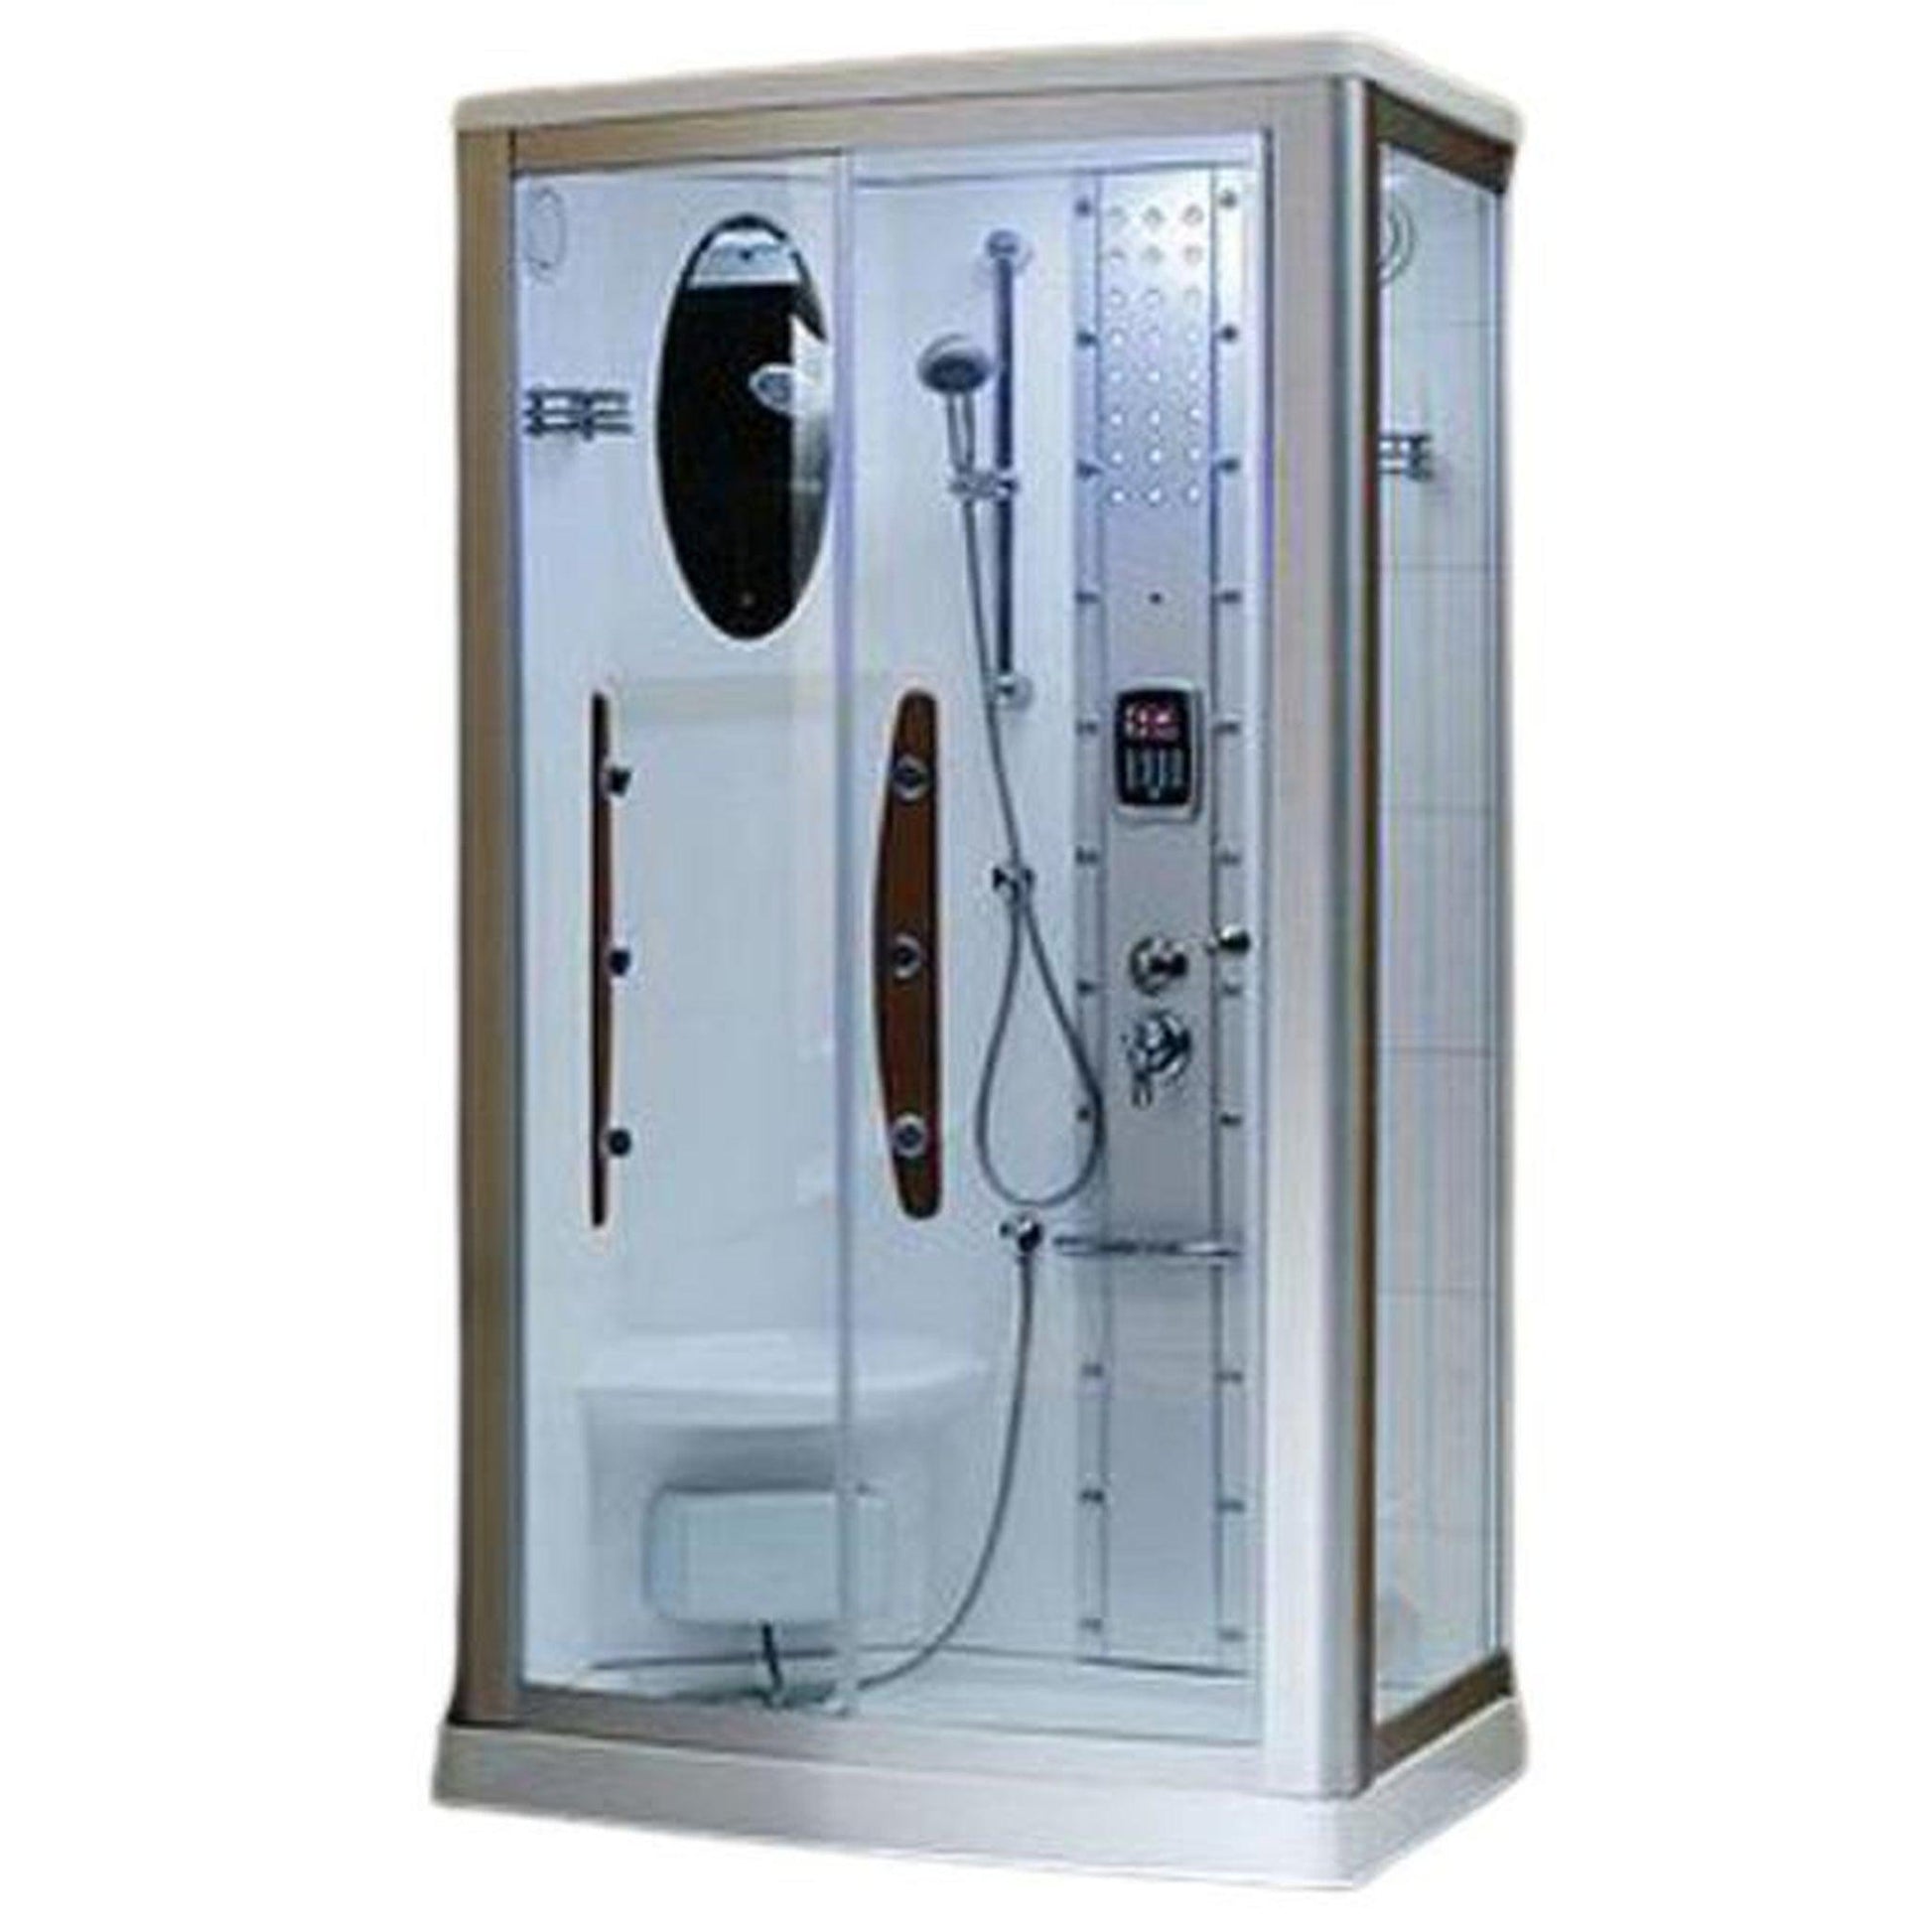 https://usbathstore.com/cdn/shop/products/Mesa-45-x-35-x-85-Clear-Tempered-Glass-Freestanding-Walk-In-Clear-Steam-Shower-With-Left-Hand-Control-Panel-Configuration-3kW-Steam-Generator-and-6-Acupuncture-Water-Body-Jets.jpg?v=1674997090&width=1946